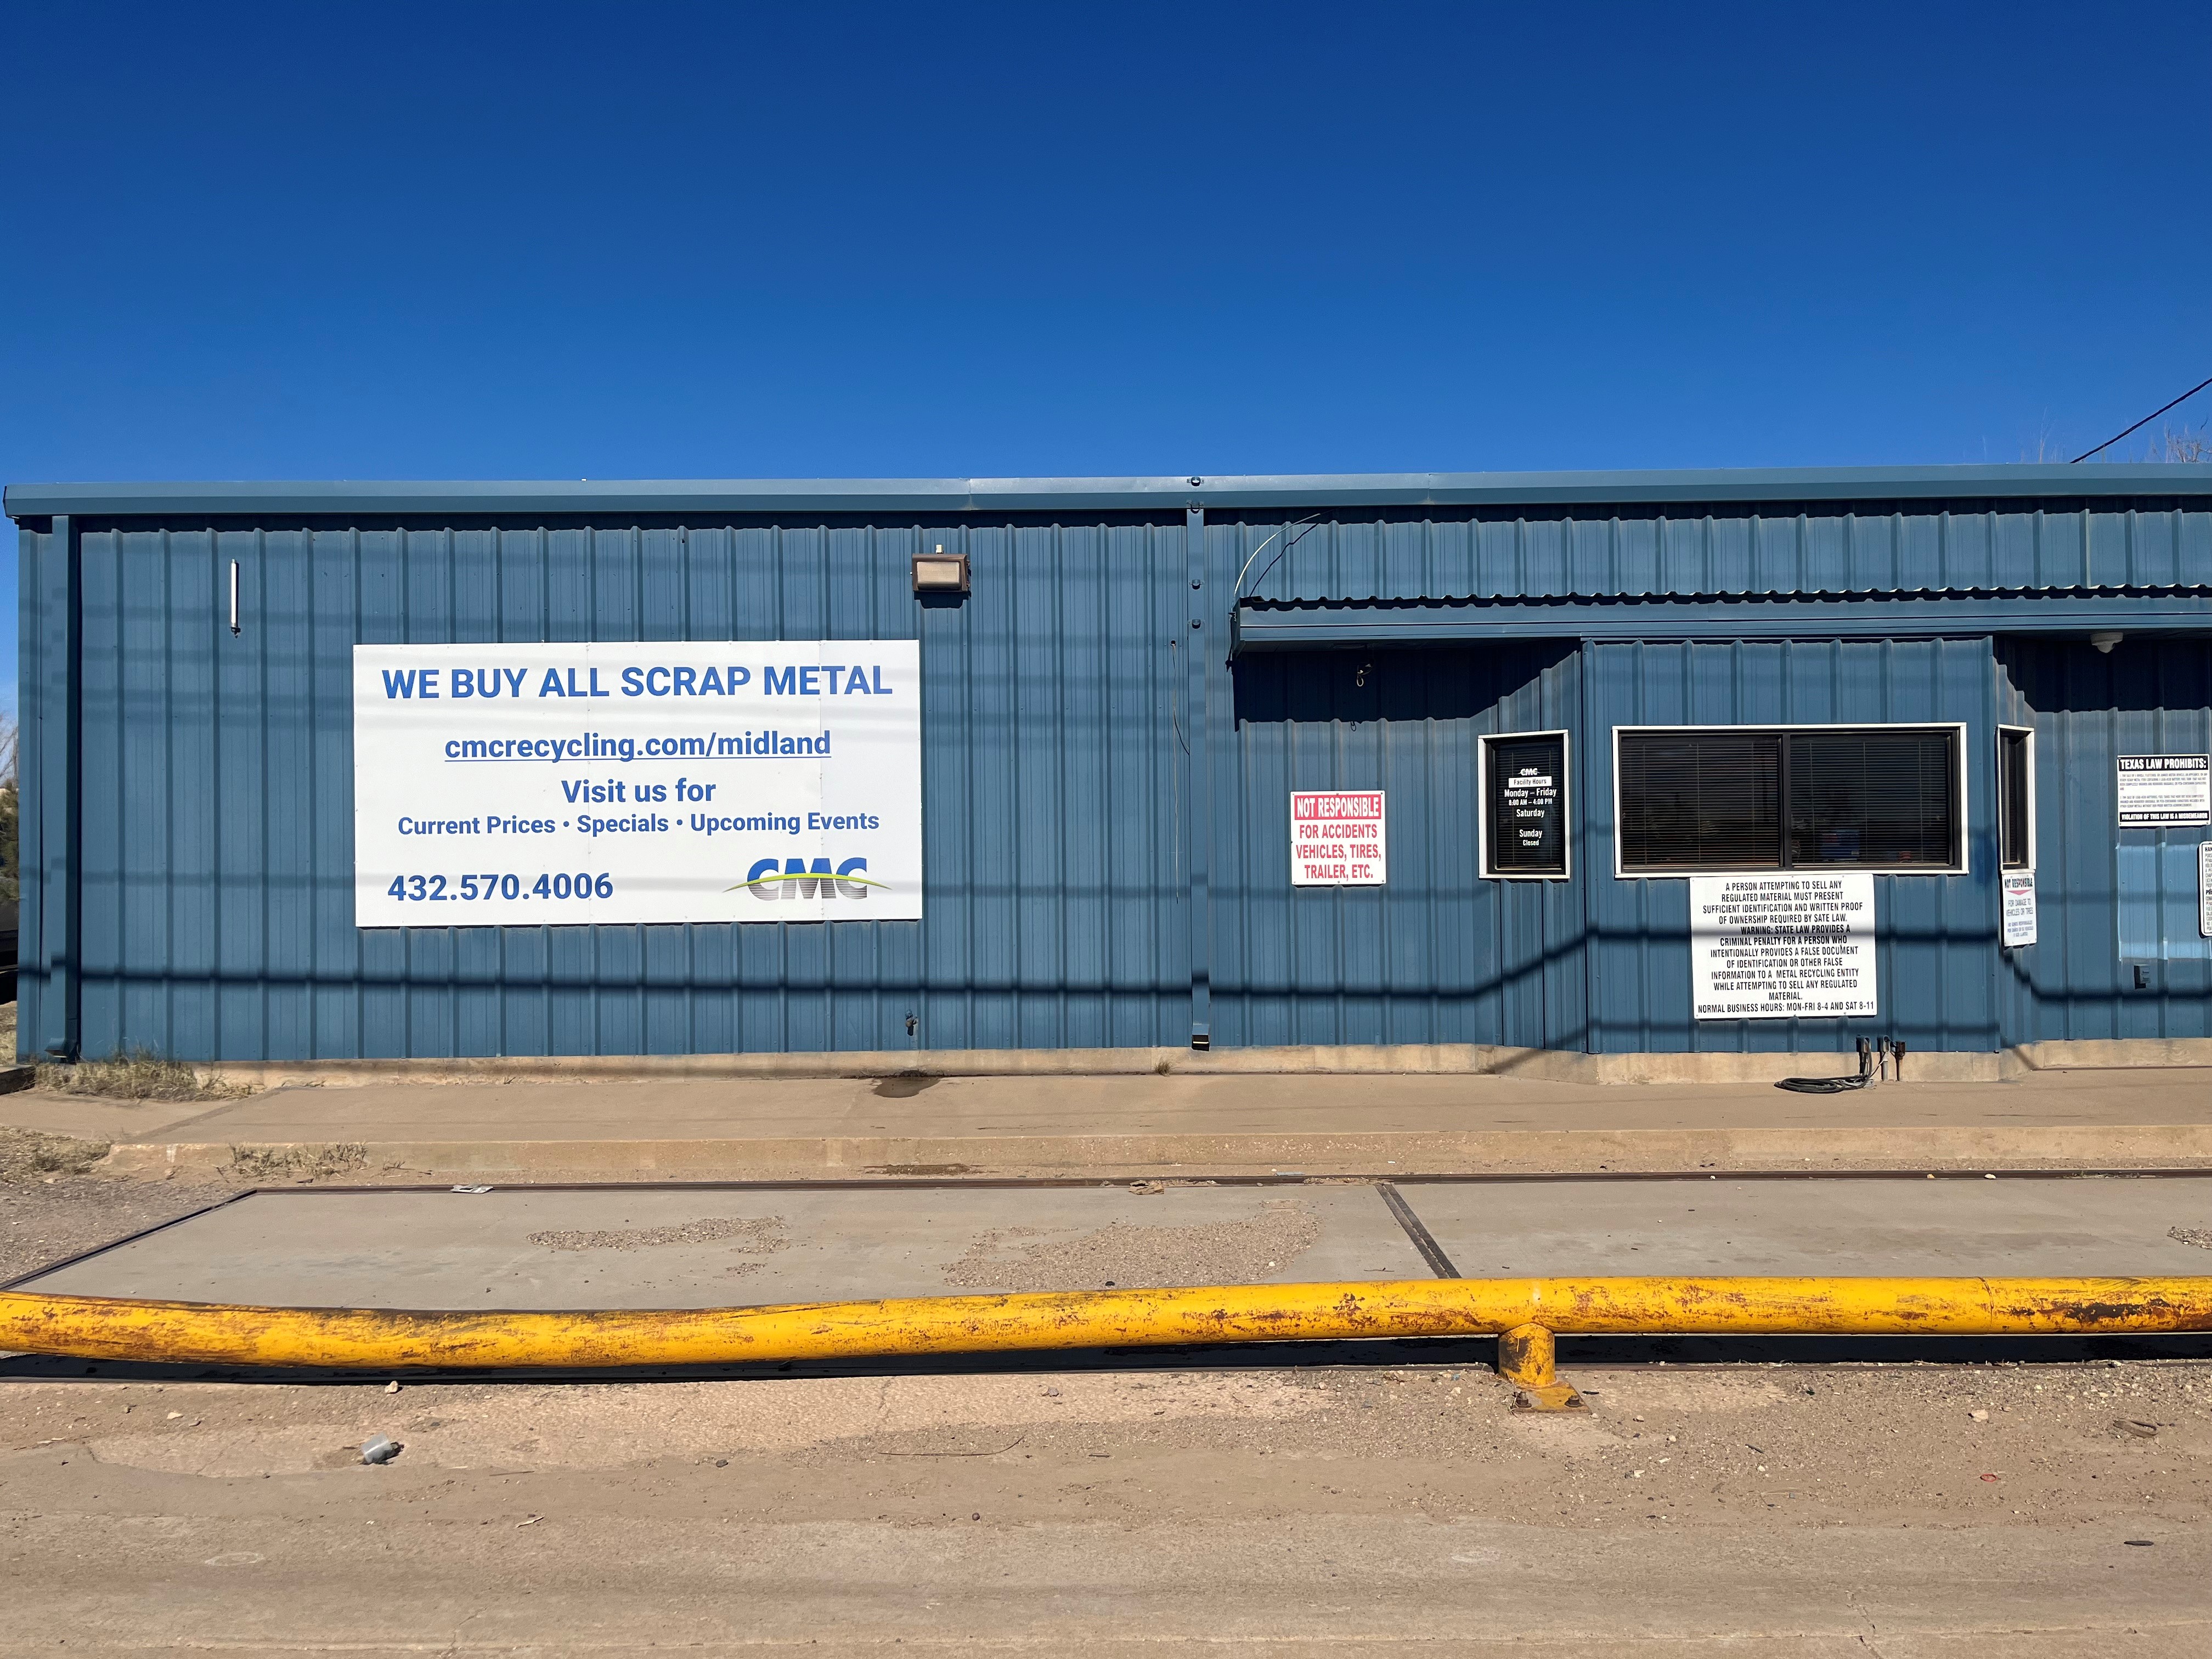 Photo of CMC Recycling Midland's main building with sign showing CMC's logo.